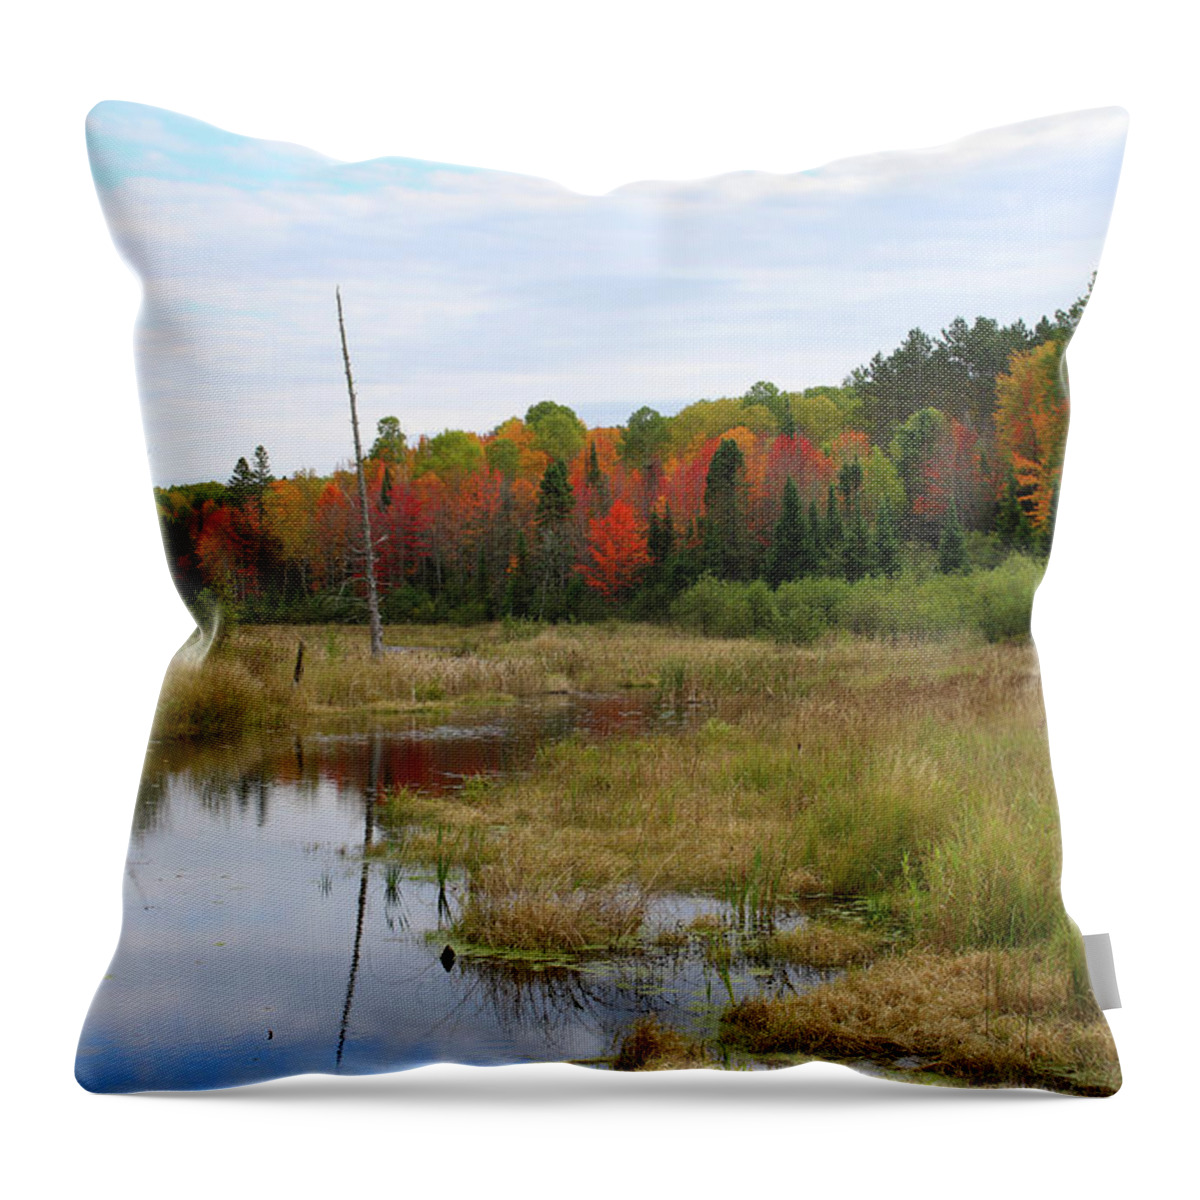 Autumn Throw Pillow featuring the photograph Autumn Marsh View by Brook Burling